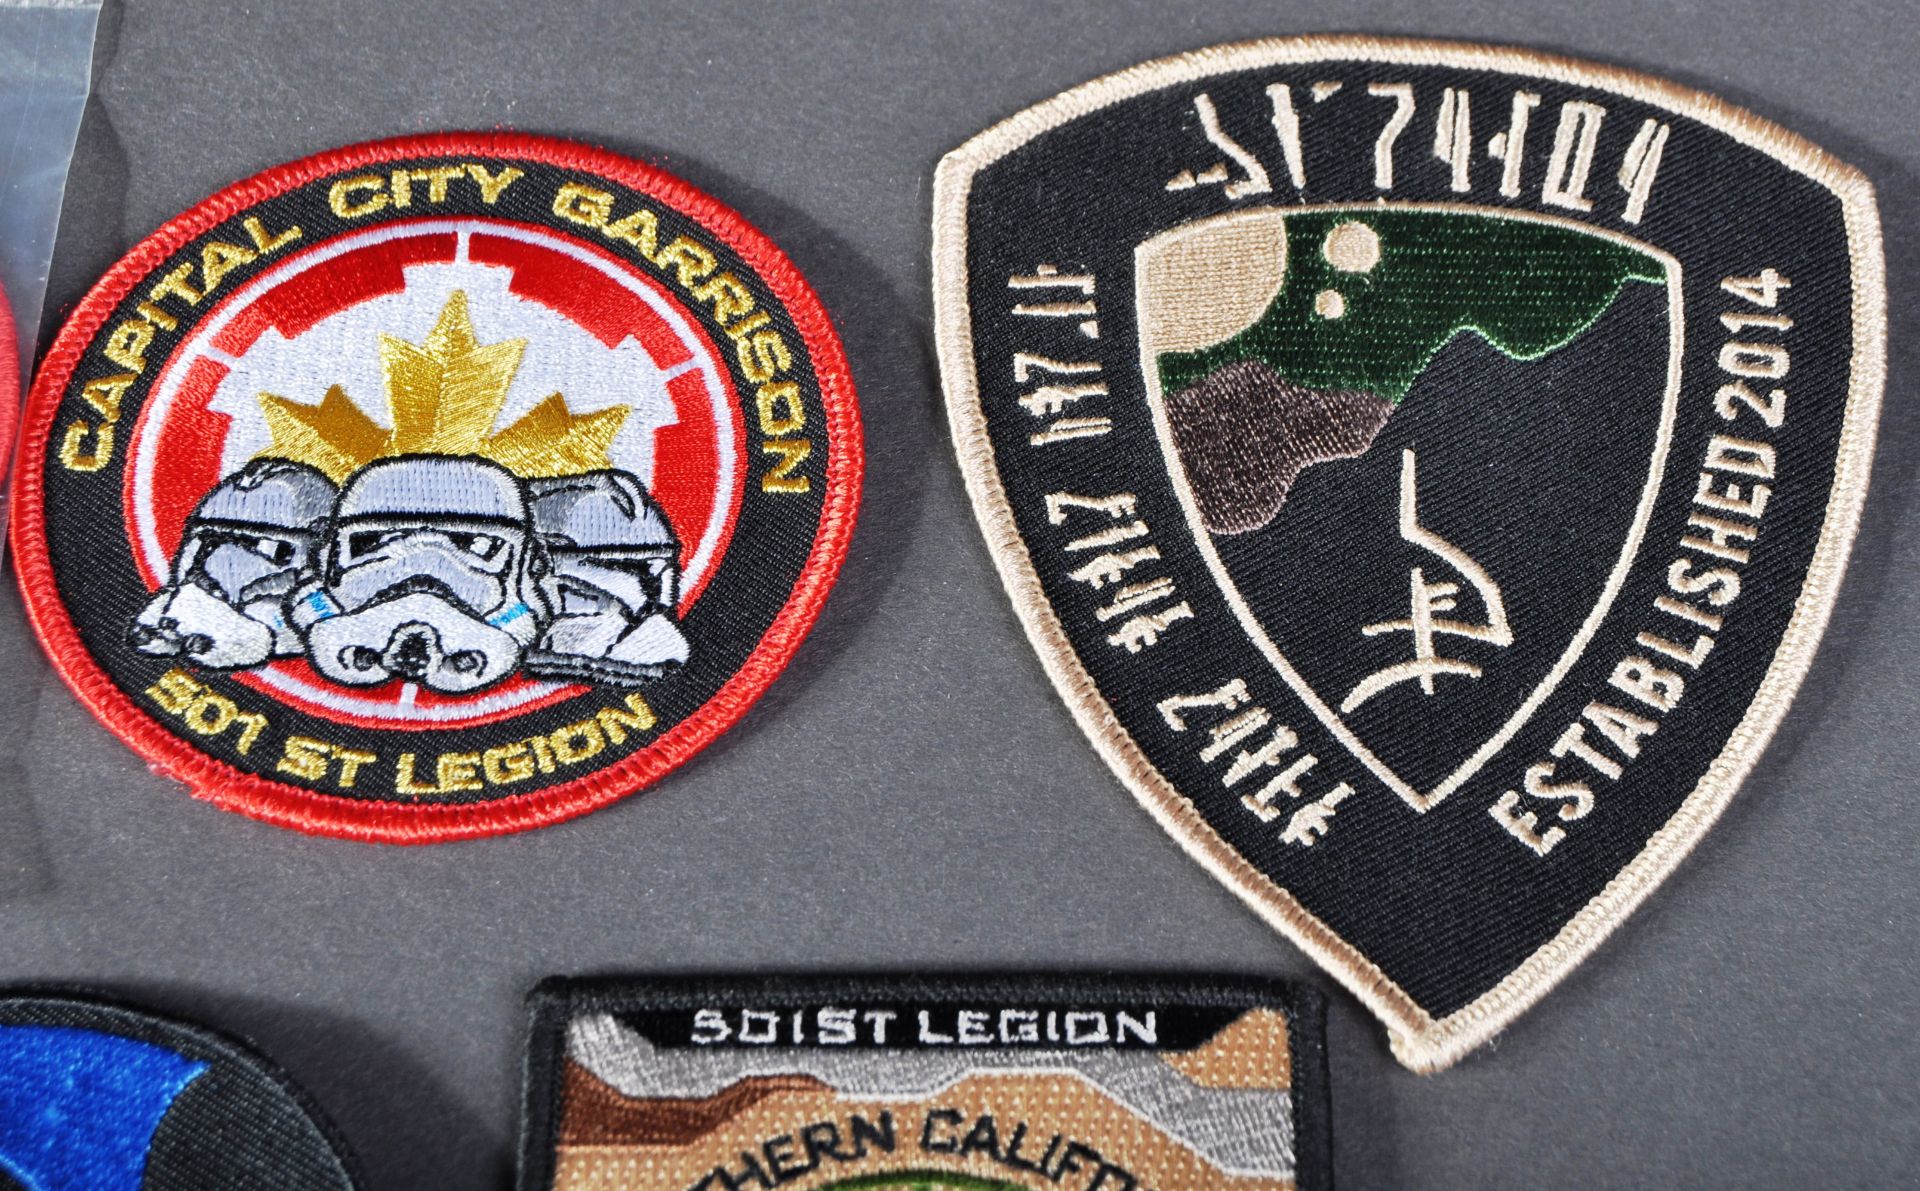 ESTATE OF JEREMY BULLOCH - STAR WARS - CLOTH PATCHES - Image 6 of 8